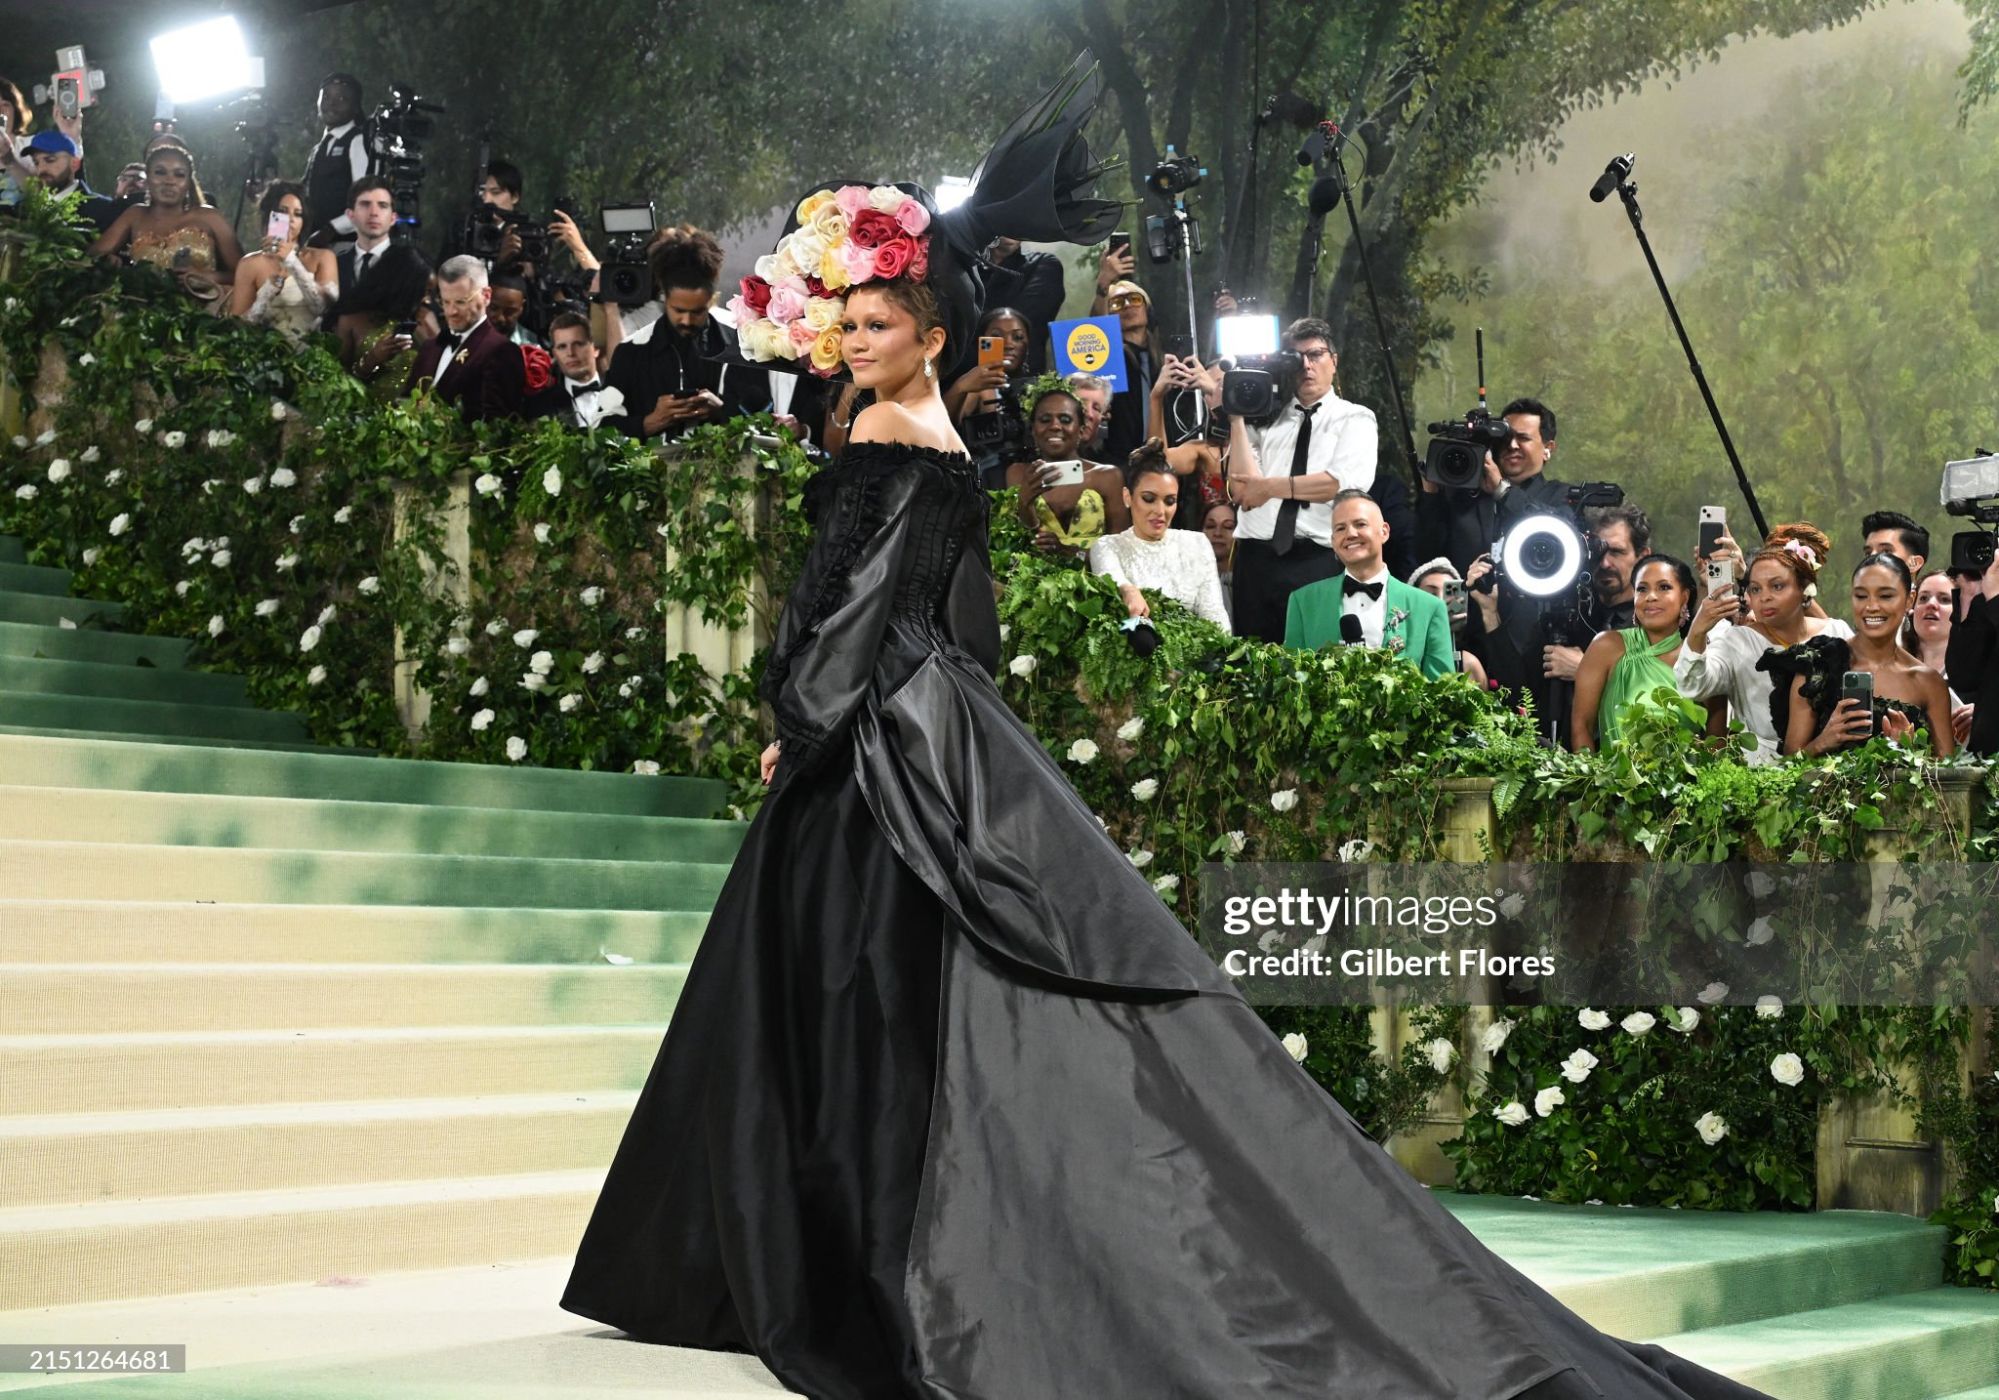 gettyimages-2151264681-2048x2048.jpg